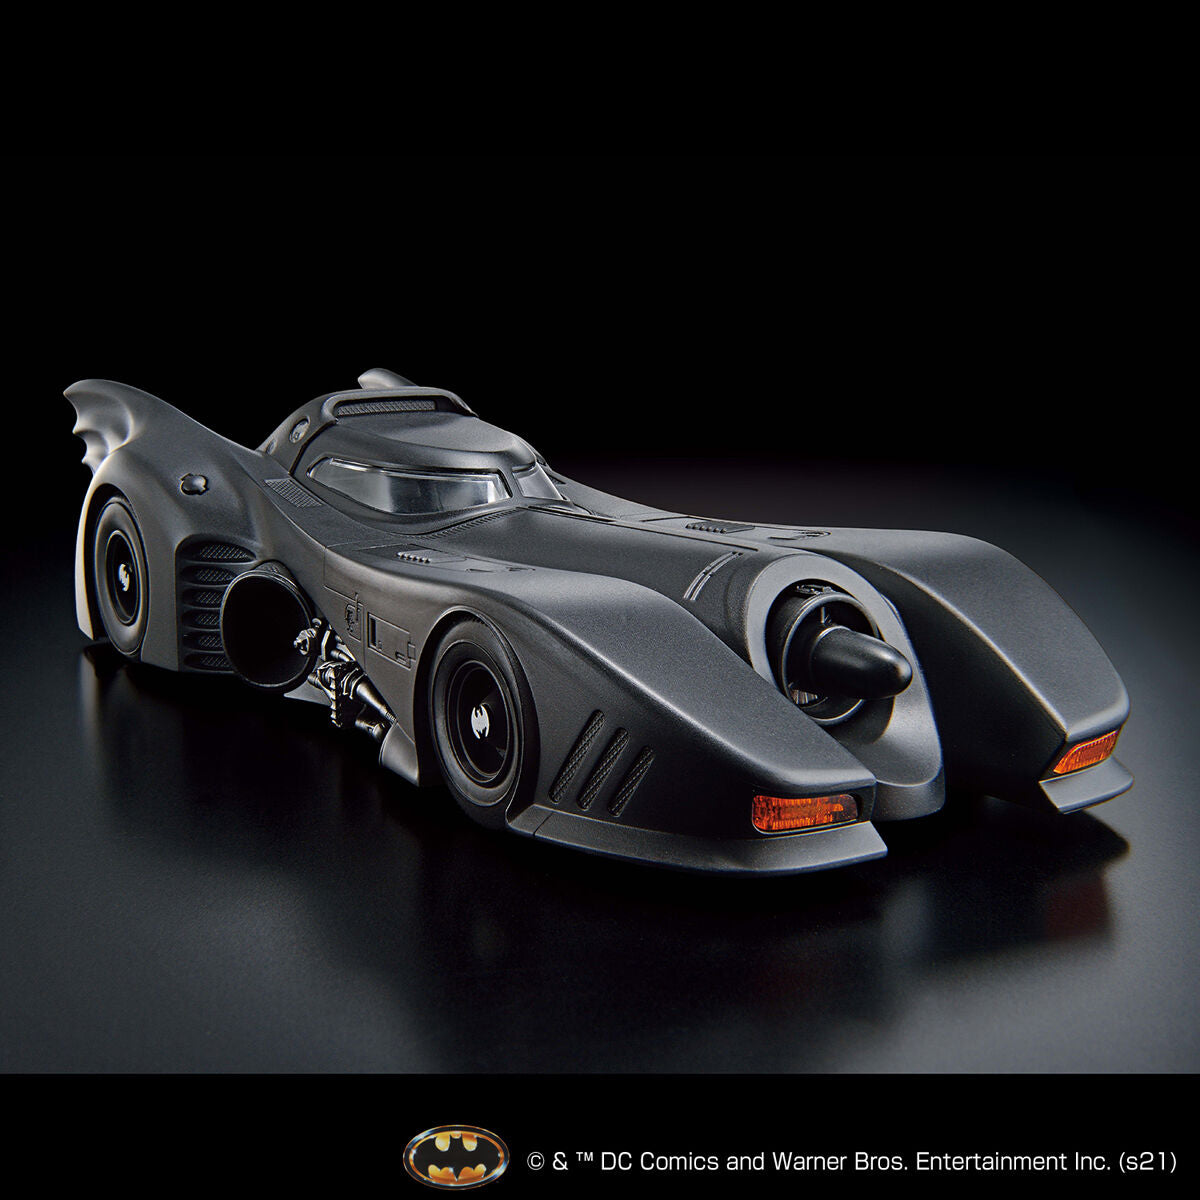 Image alt text: Batman - 1/35 Scale Batmobile (Batman Ver.) - Model Kit, intricately sculpted parts, slideable roof section, meticulously reproduced cockpit interior and mechanical details, deployment of machine guns and rocket anchors, Nippon Figures.